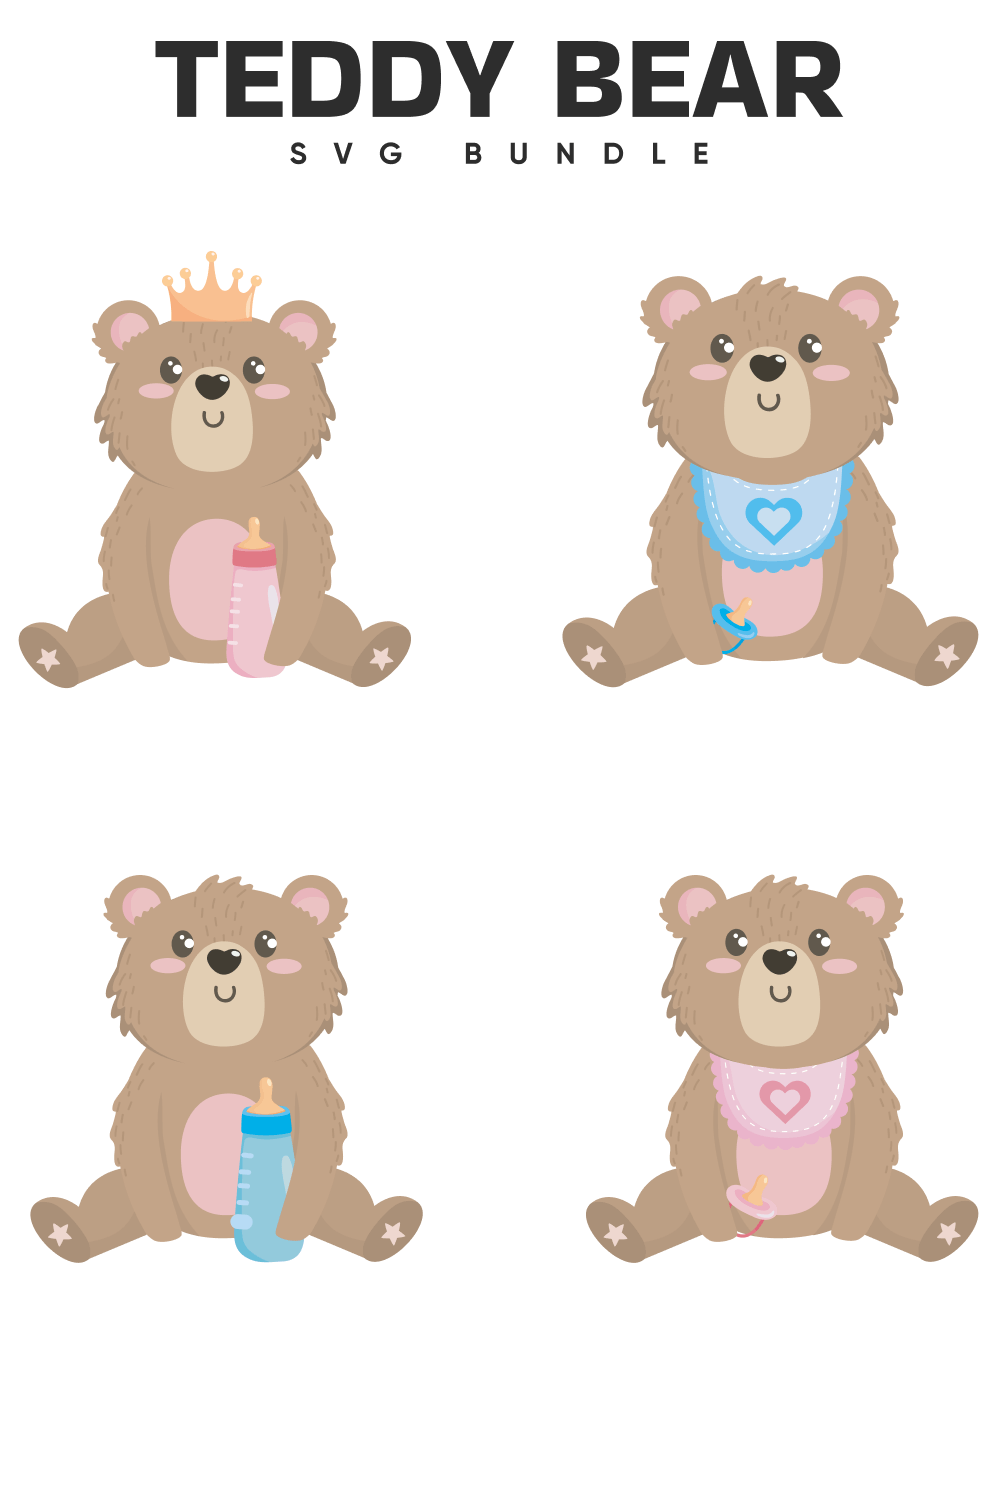 Small teddy bears with bottles and pacifiers.